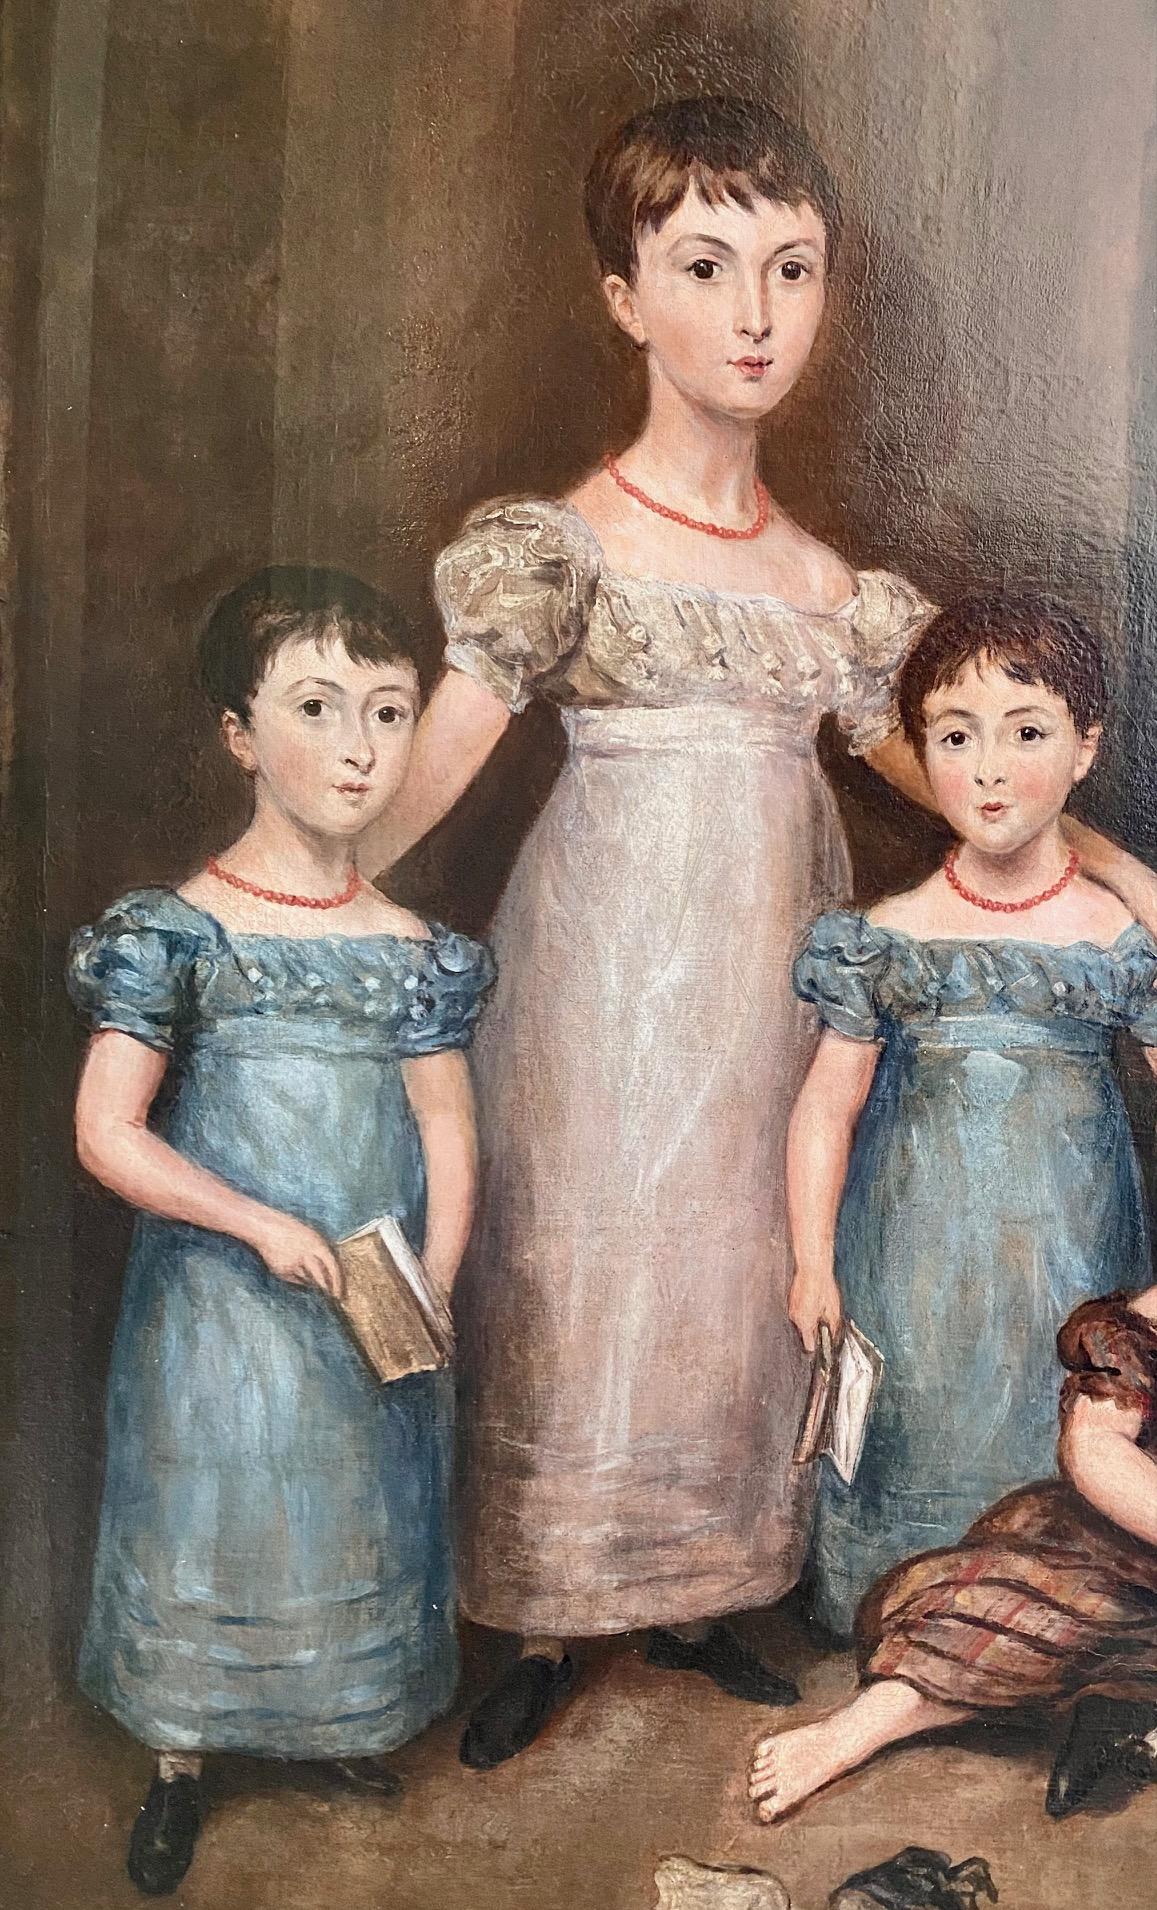 Early 19th Century Portrait of the Marsh Family Twins, by Thomas Arrowsmith (English: 1772 - 1834), circa 1830, an oil on canvas group portrait of the celebrated five children of the Marsh family of Boston. The two pair of twin girls and their